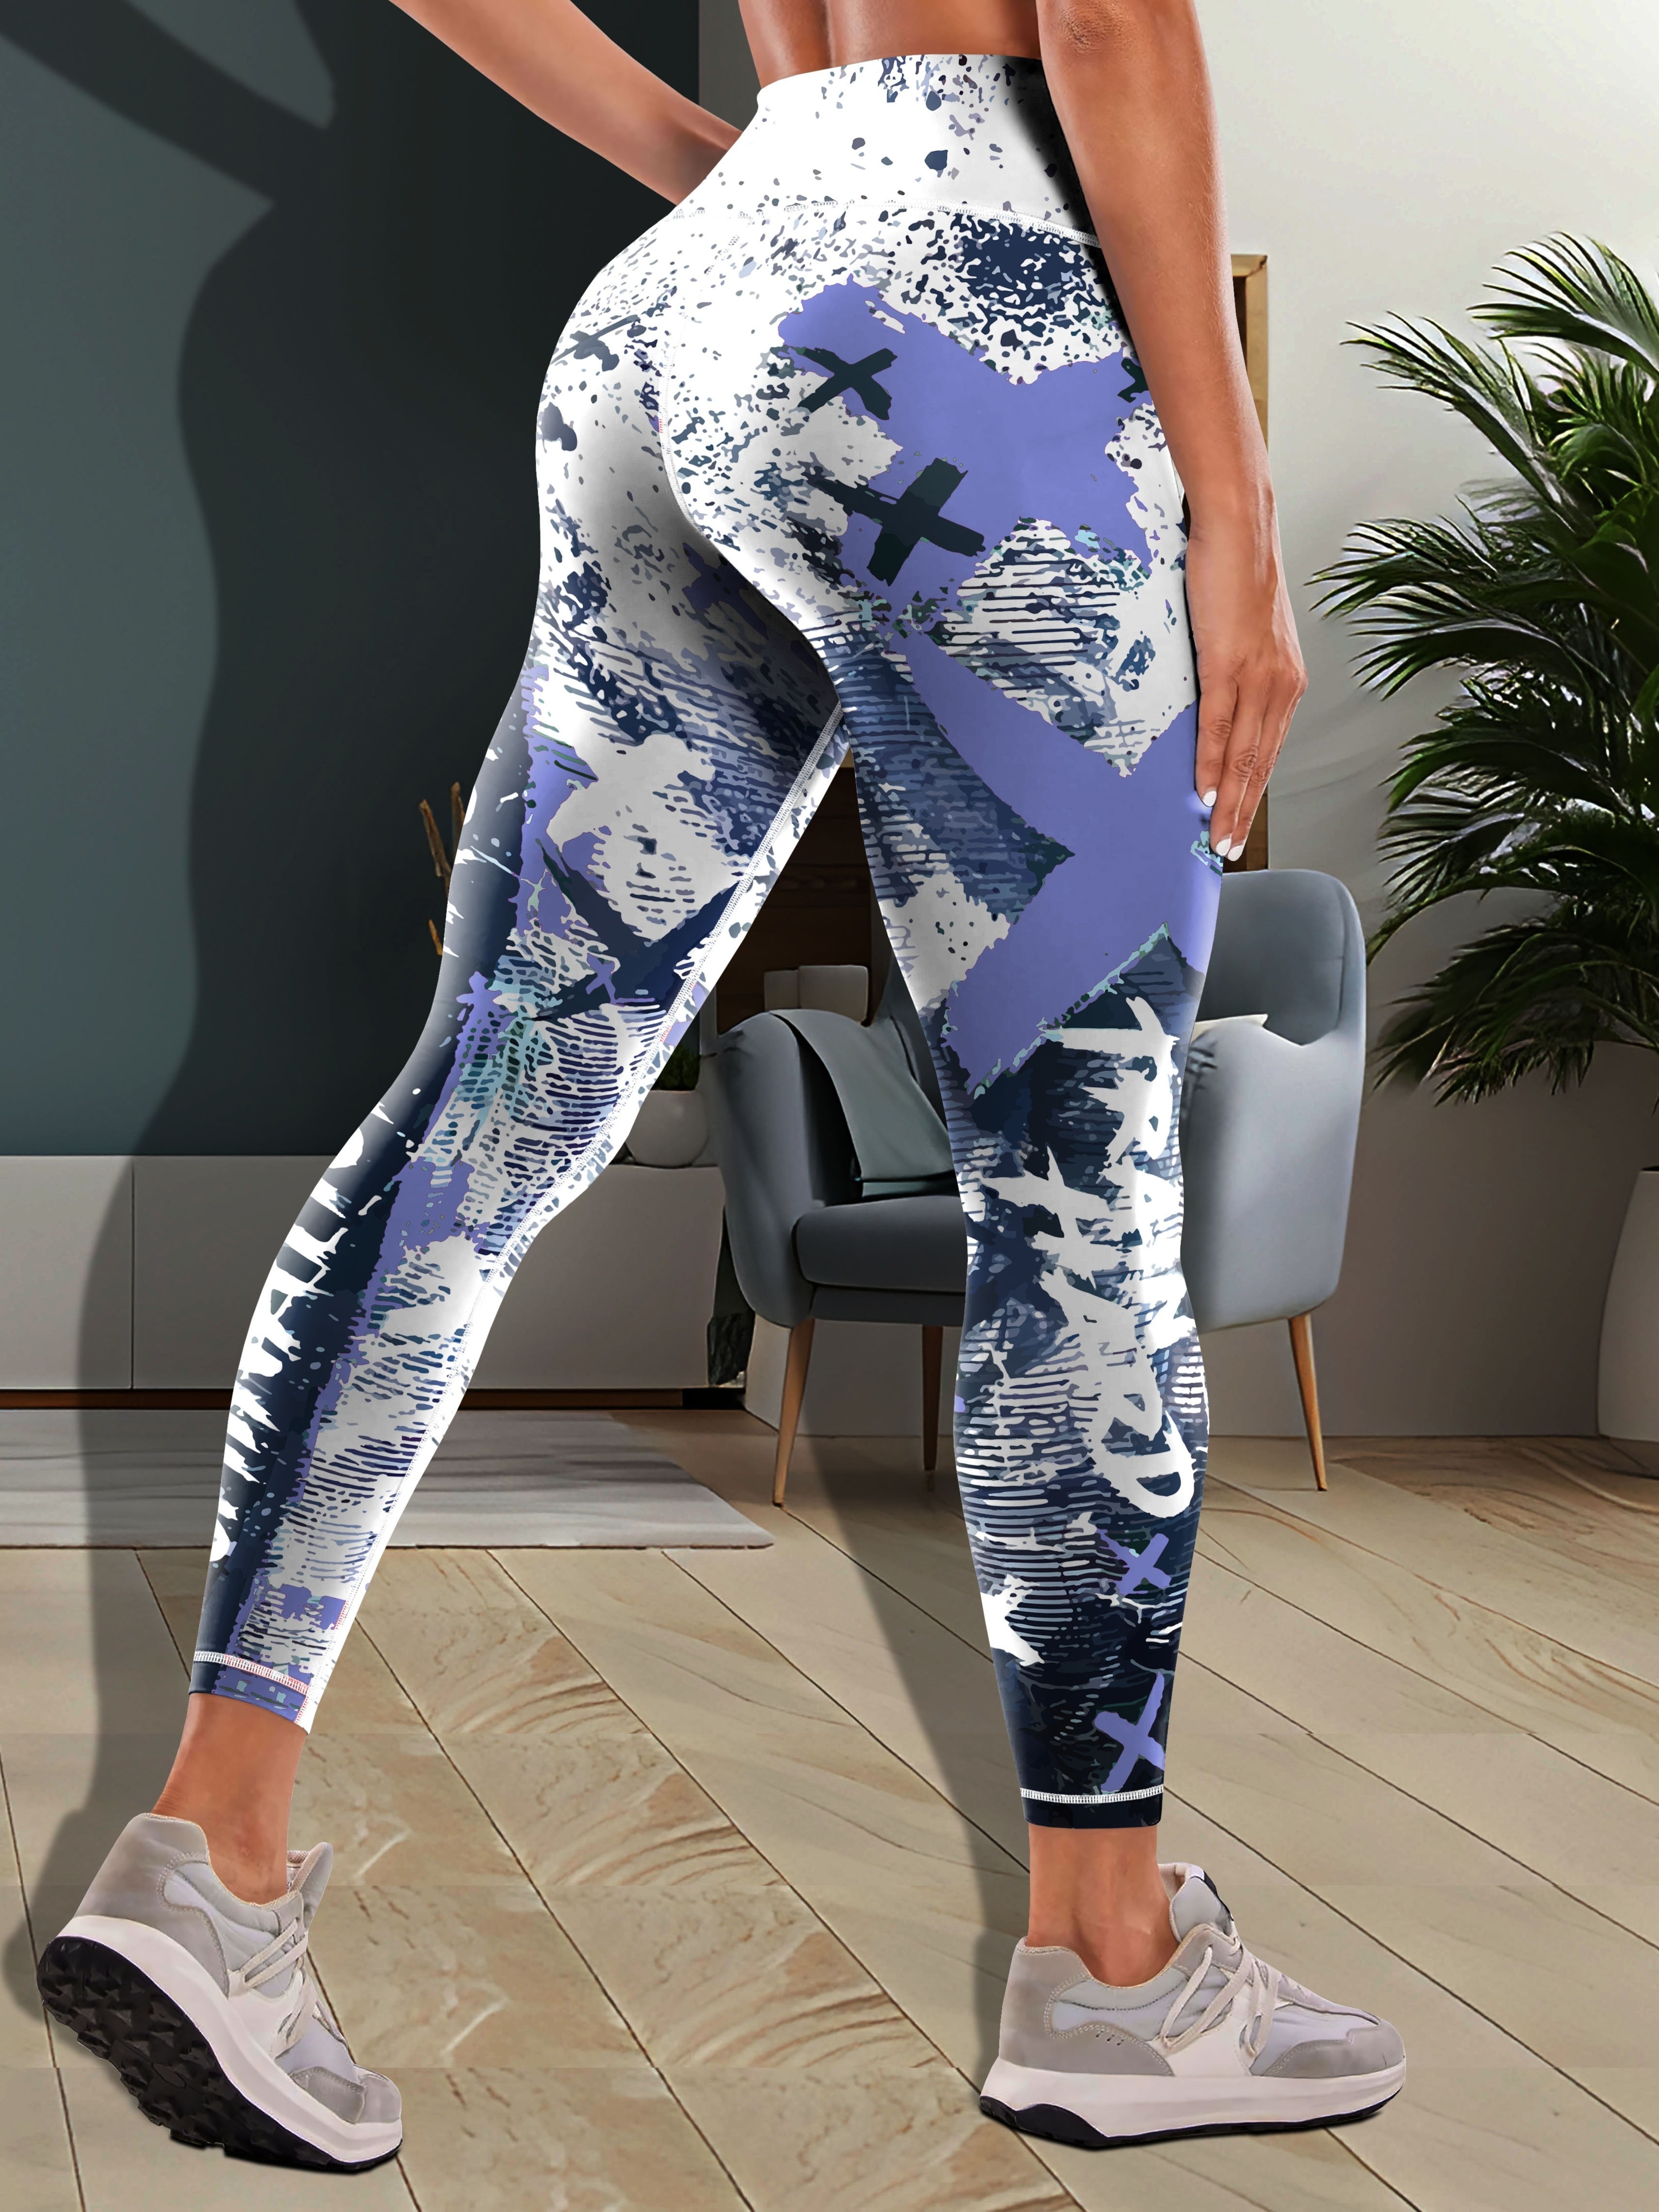  HK97 Blue Marble Yoga Leggings for Women Teen Girls, Abstract  Fluid Texture Art Geometric Line Athletic Pants High Waisted Tummy Control  Workout Running Hiking Golf Softball Pants Capris S : Clothing